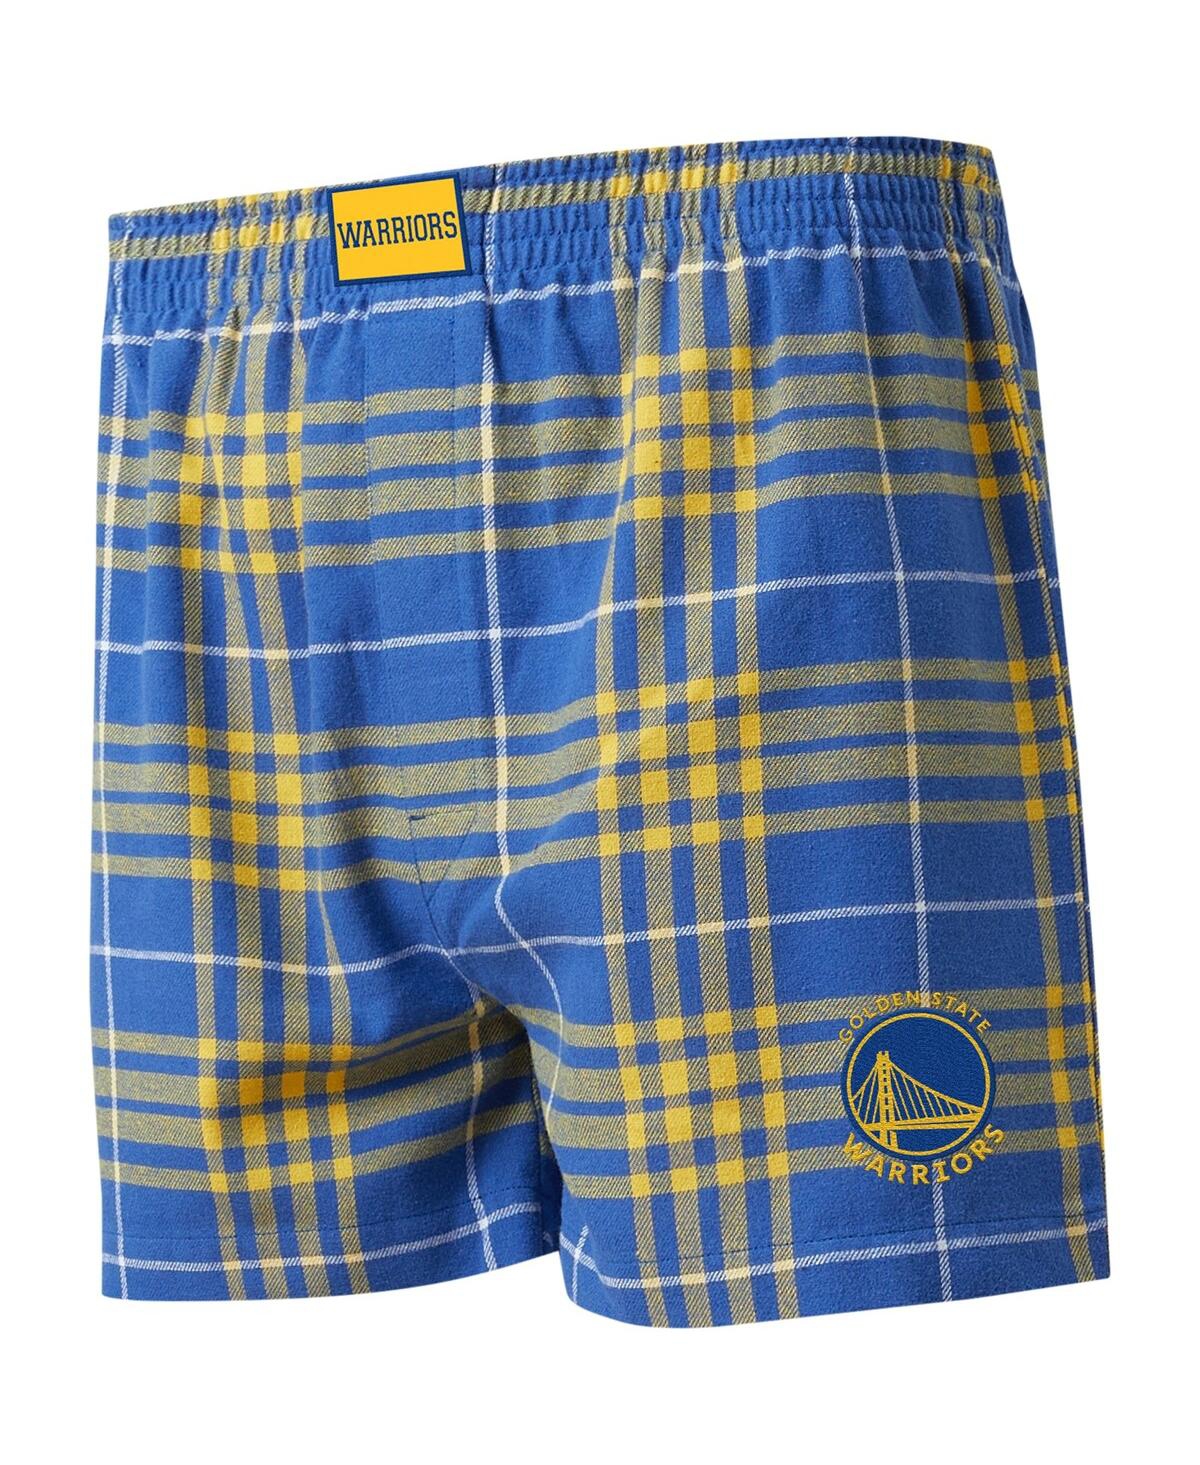 Men's Royal, Gold Golden State Warriors Concord Boxers - Royal, Gold